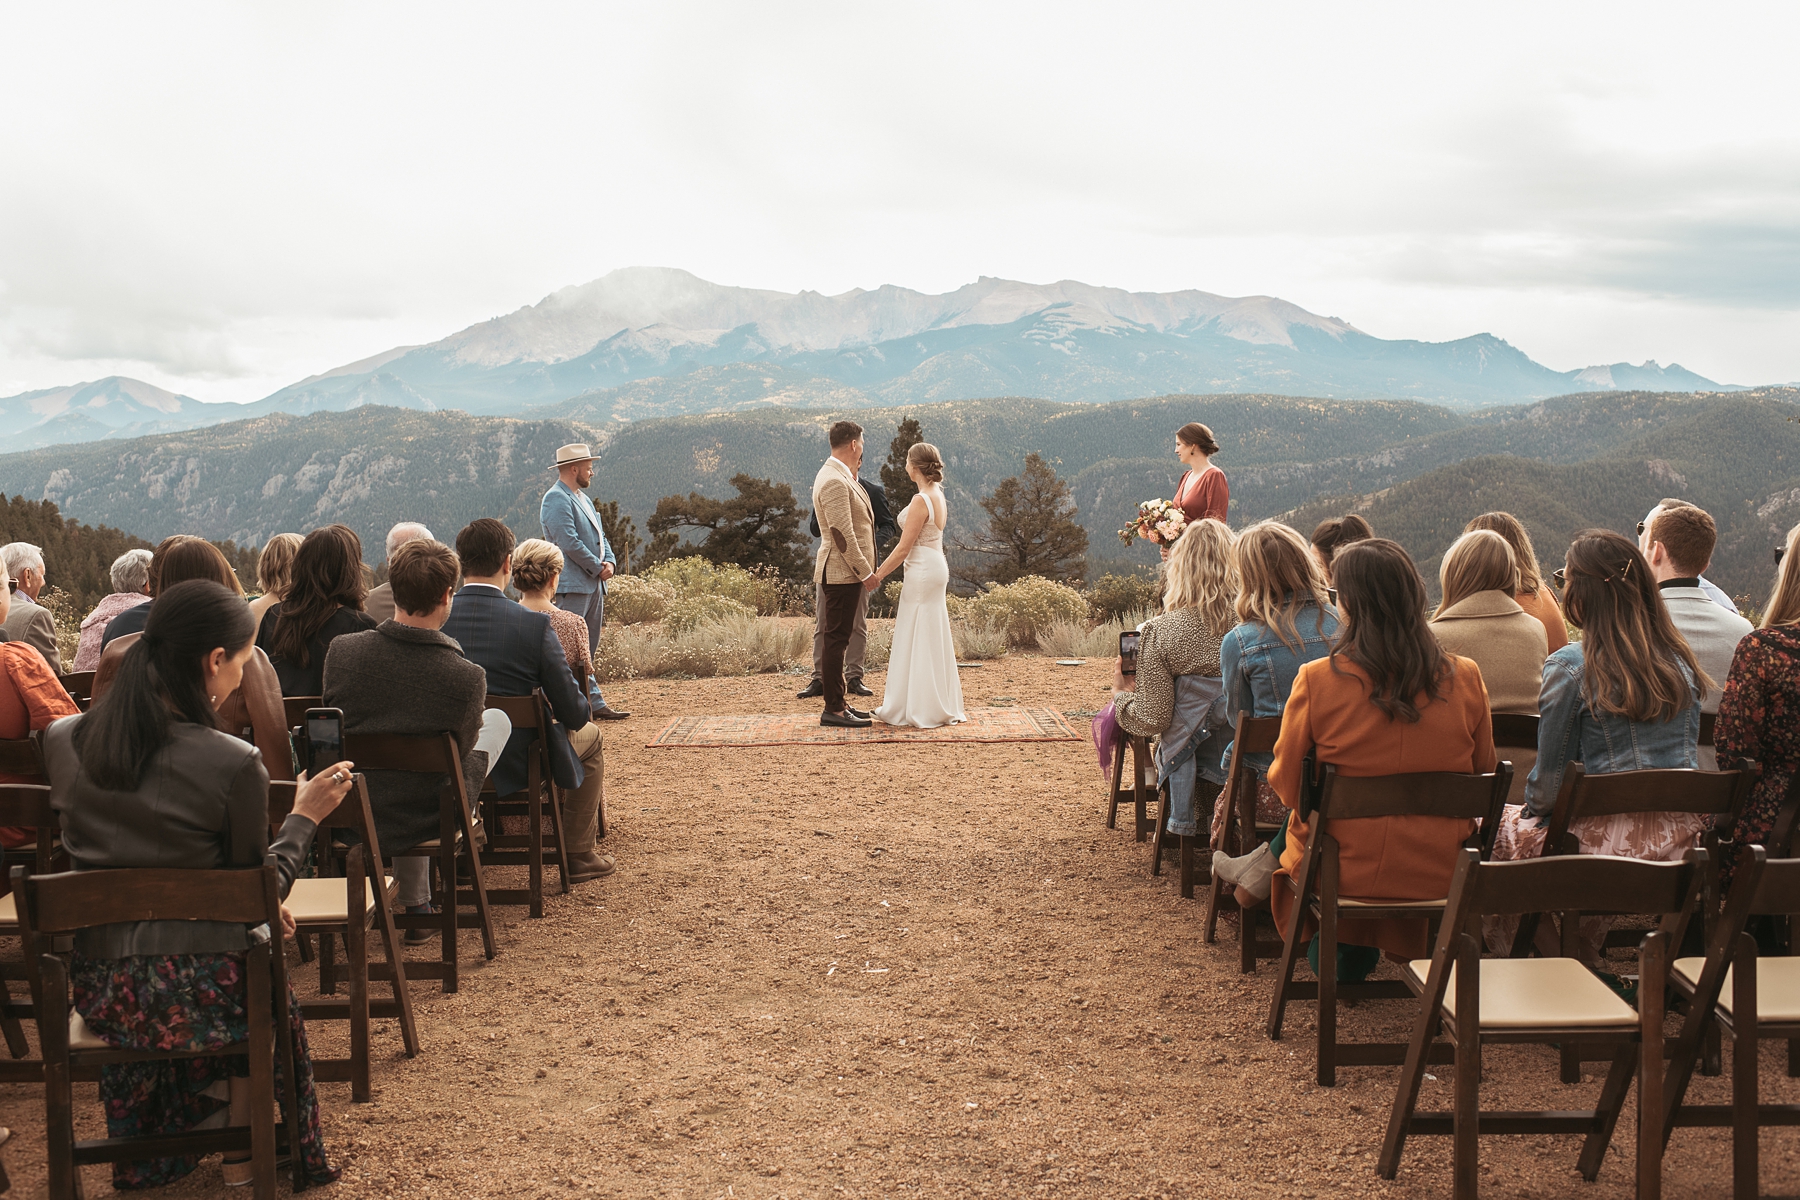 Bride and groom holding hands during ceremony at Airbnb wedding venue in Colorado